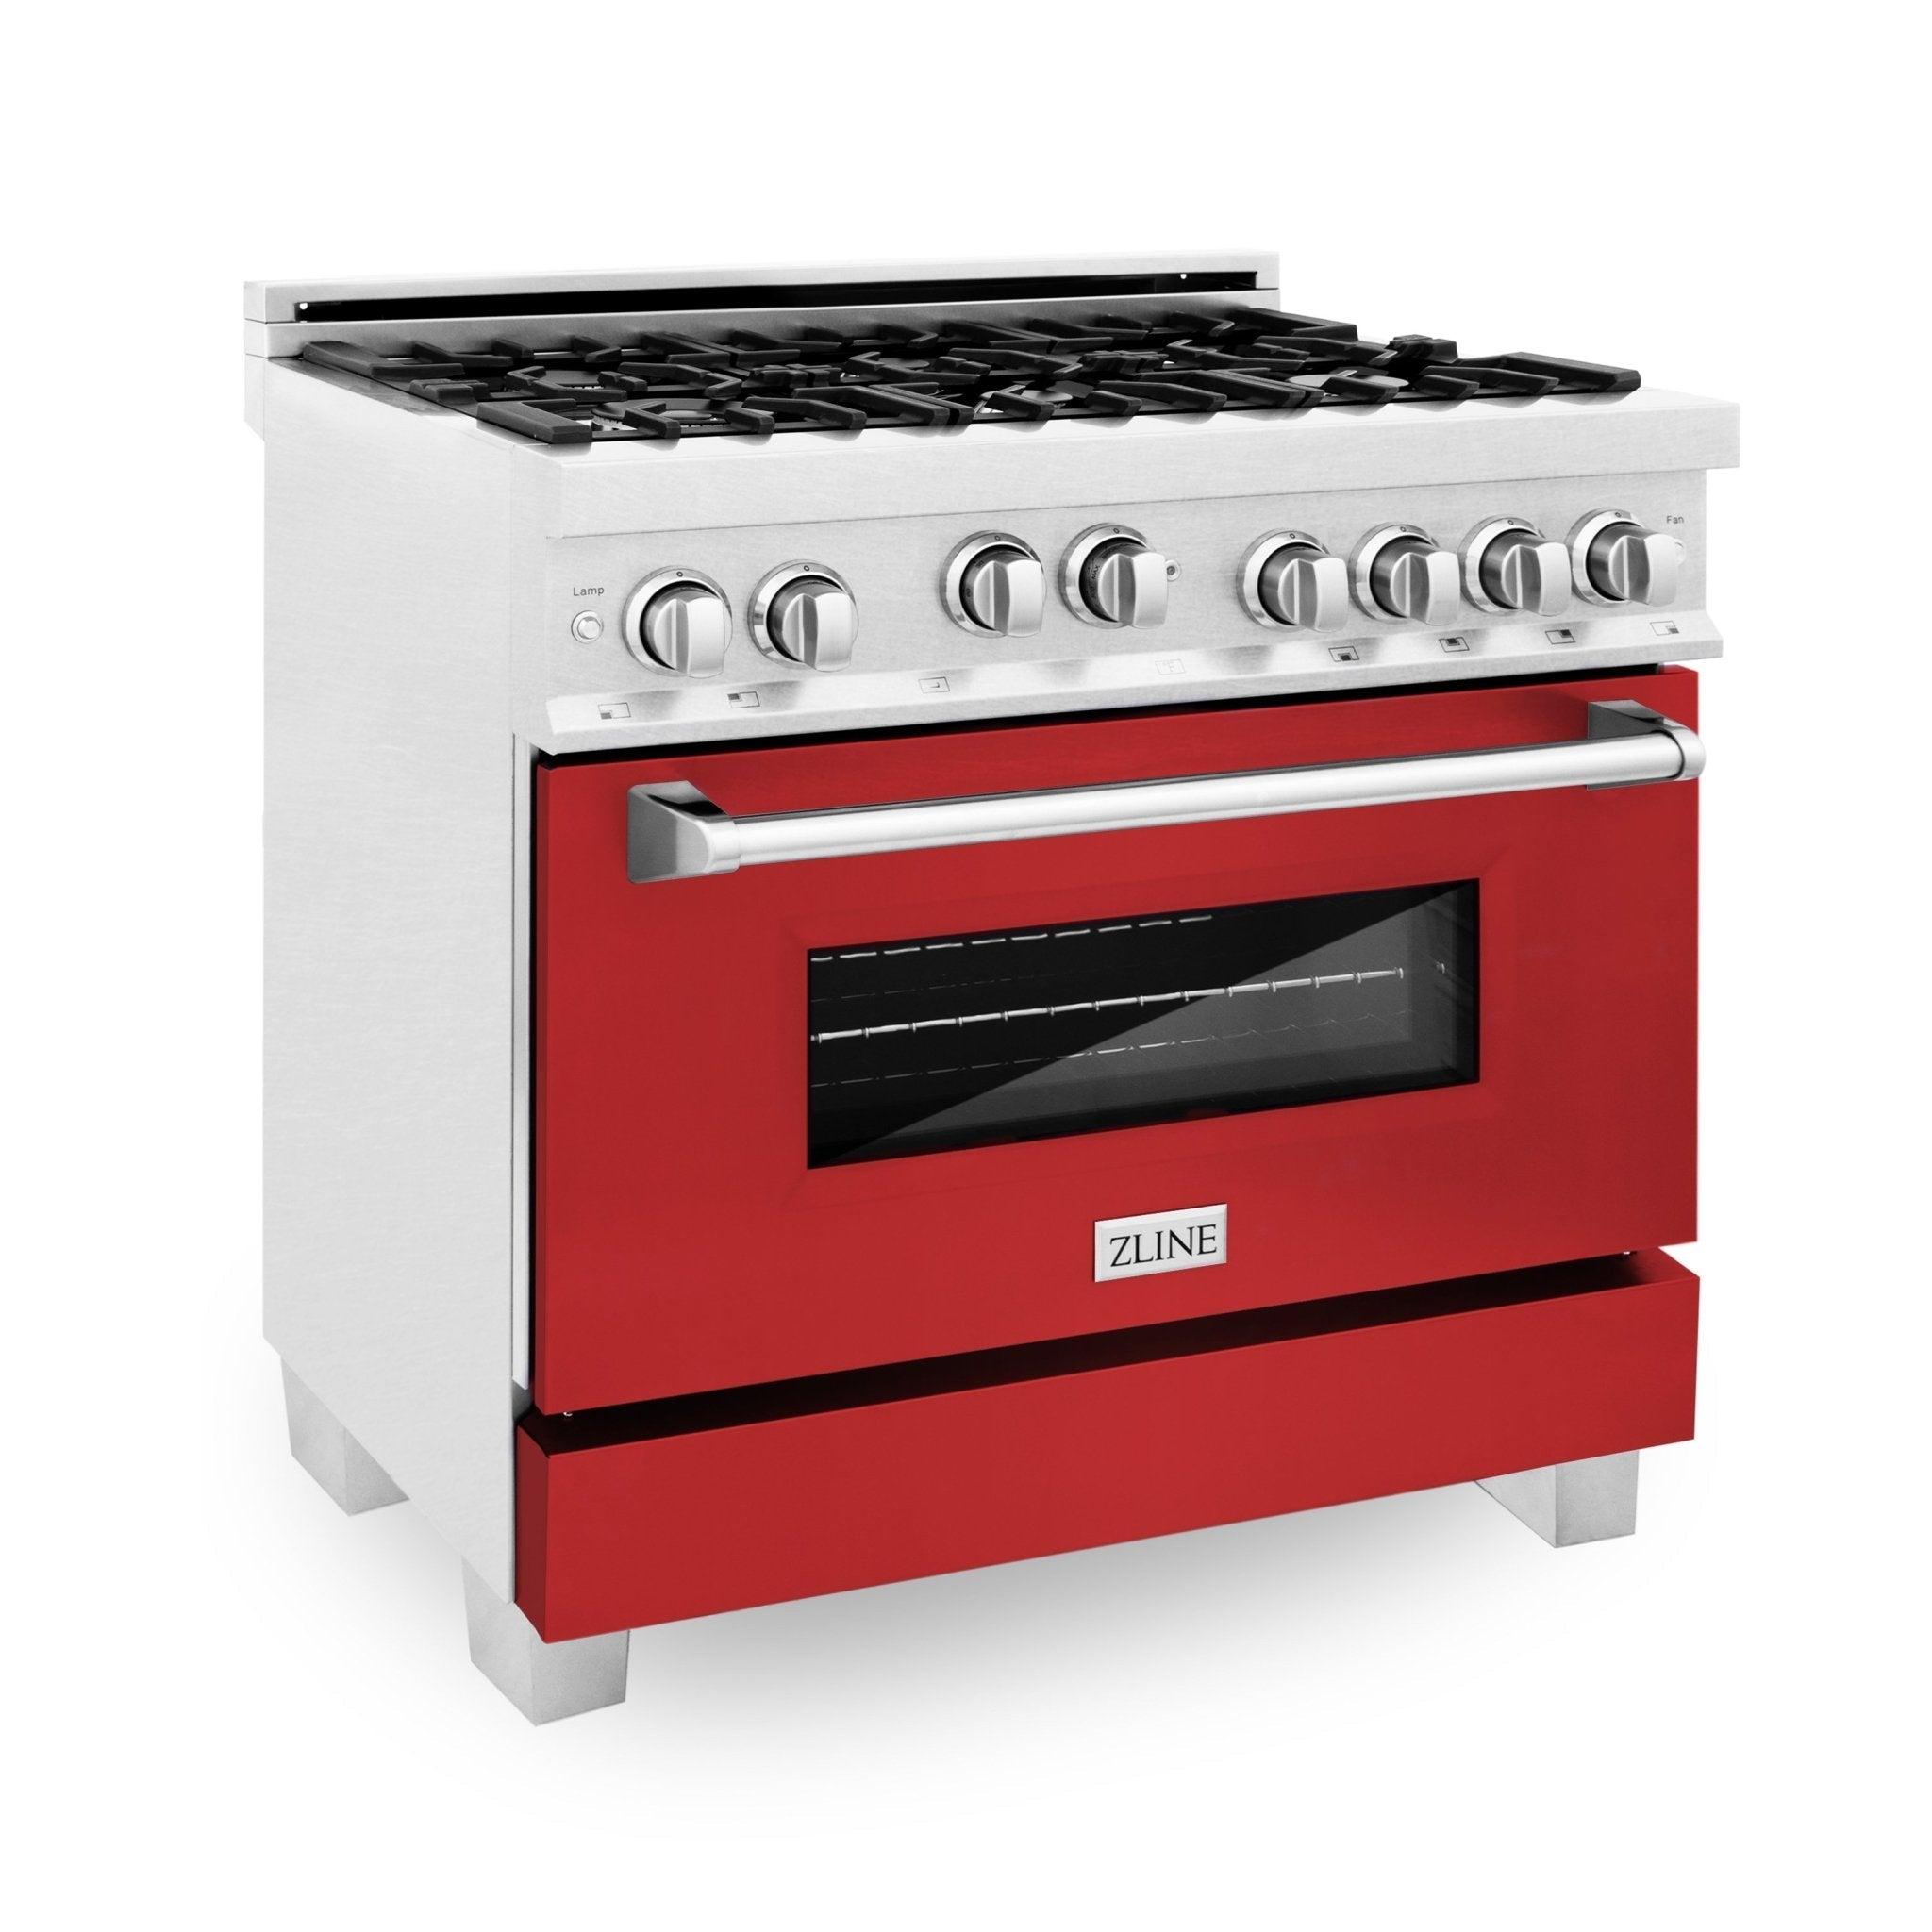 ZLINE KITCHEN AND BATH RGSRG36 ZLINE 36" Professional 4.6 cu. ft. Gas on Gas Range in ZLINE DuraSnow R Stainless Steel with Color Door Options Color: Red Gloss